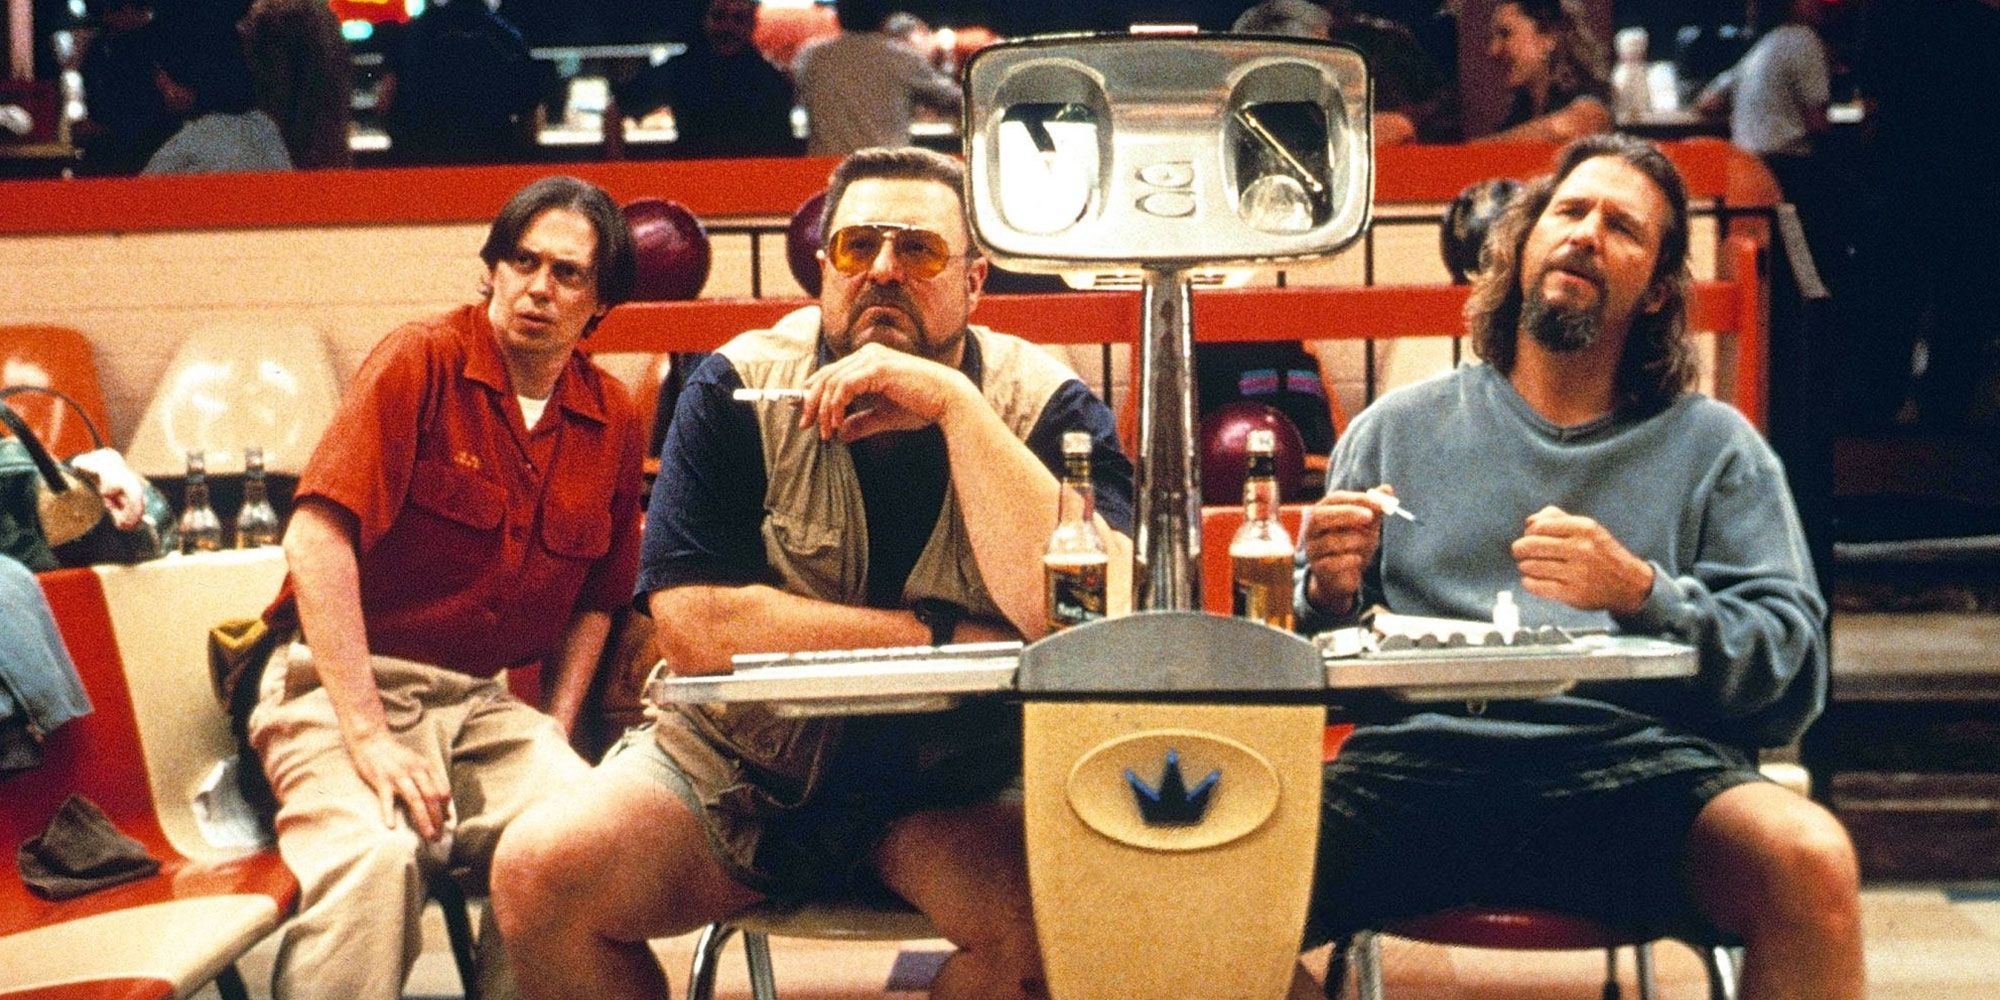 The cast of The Big Lebowski